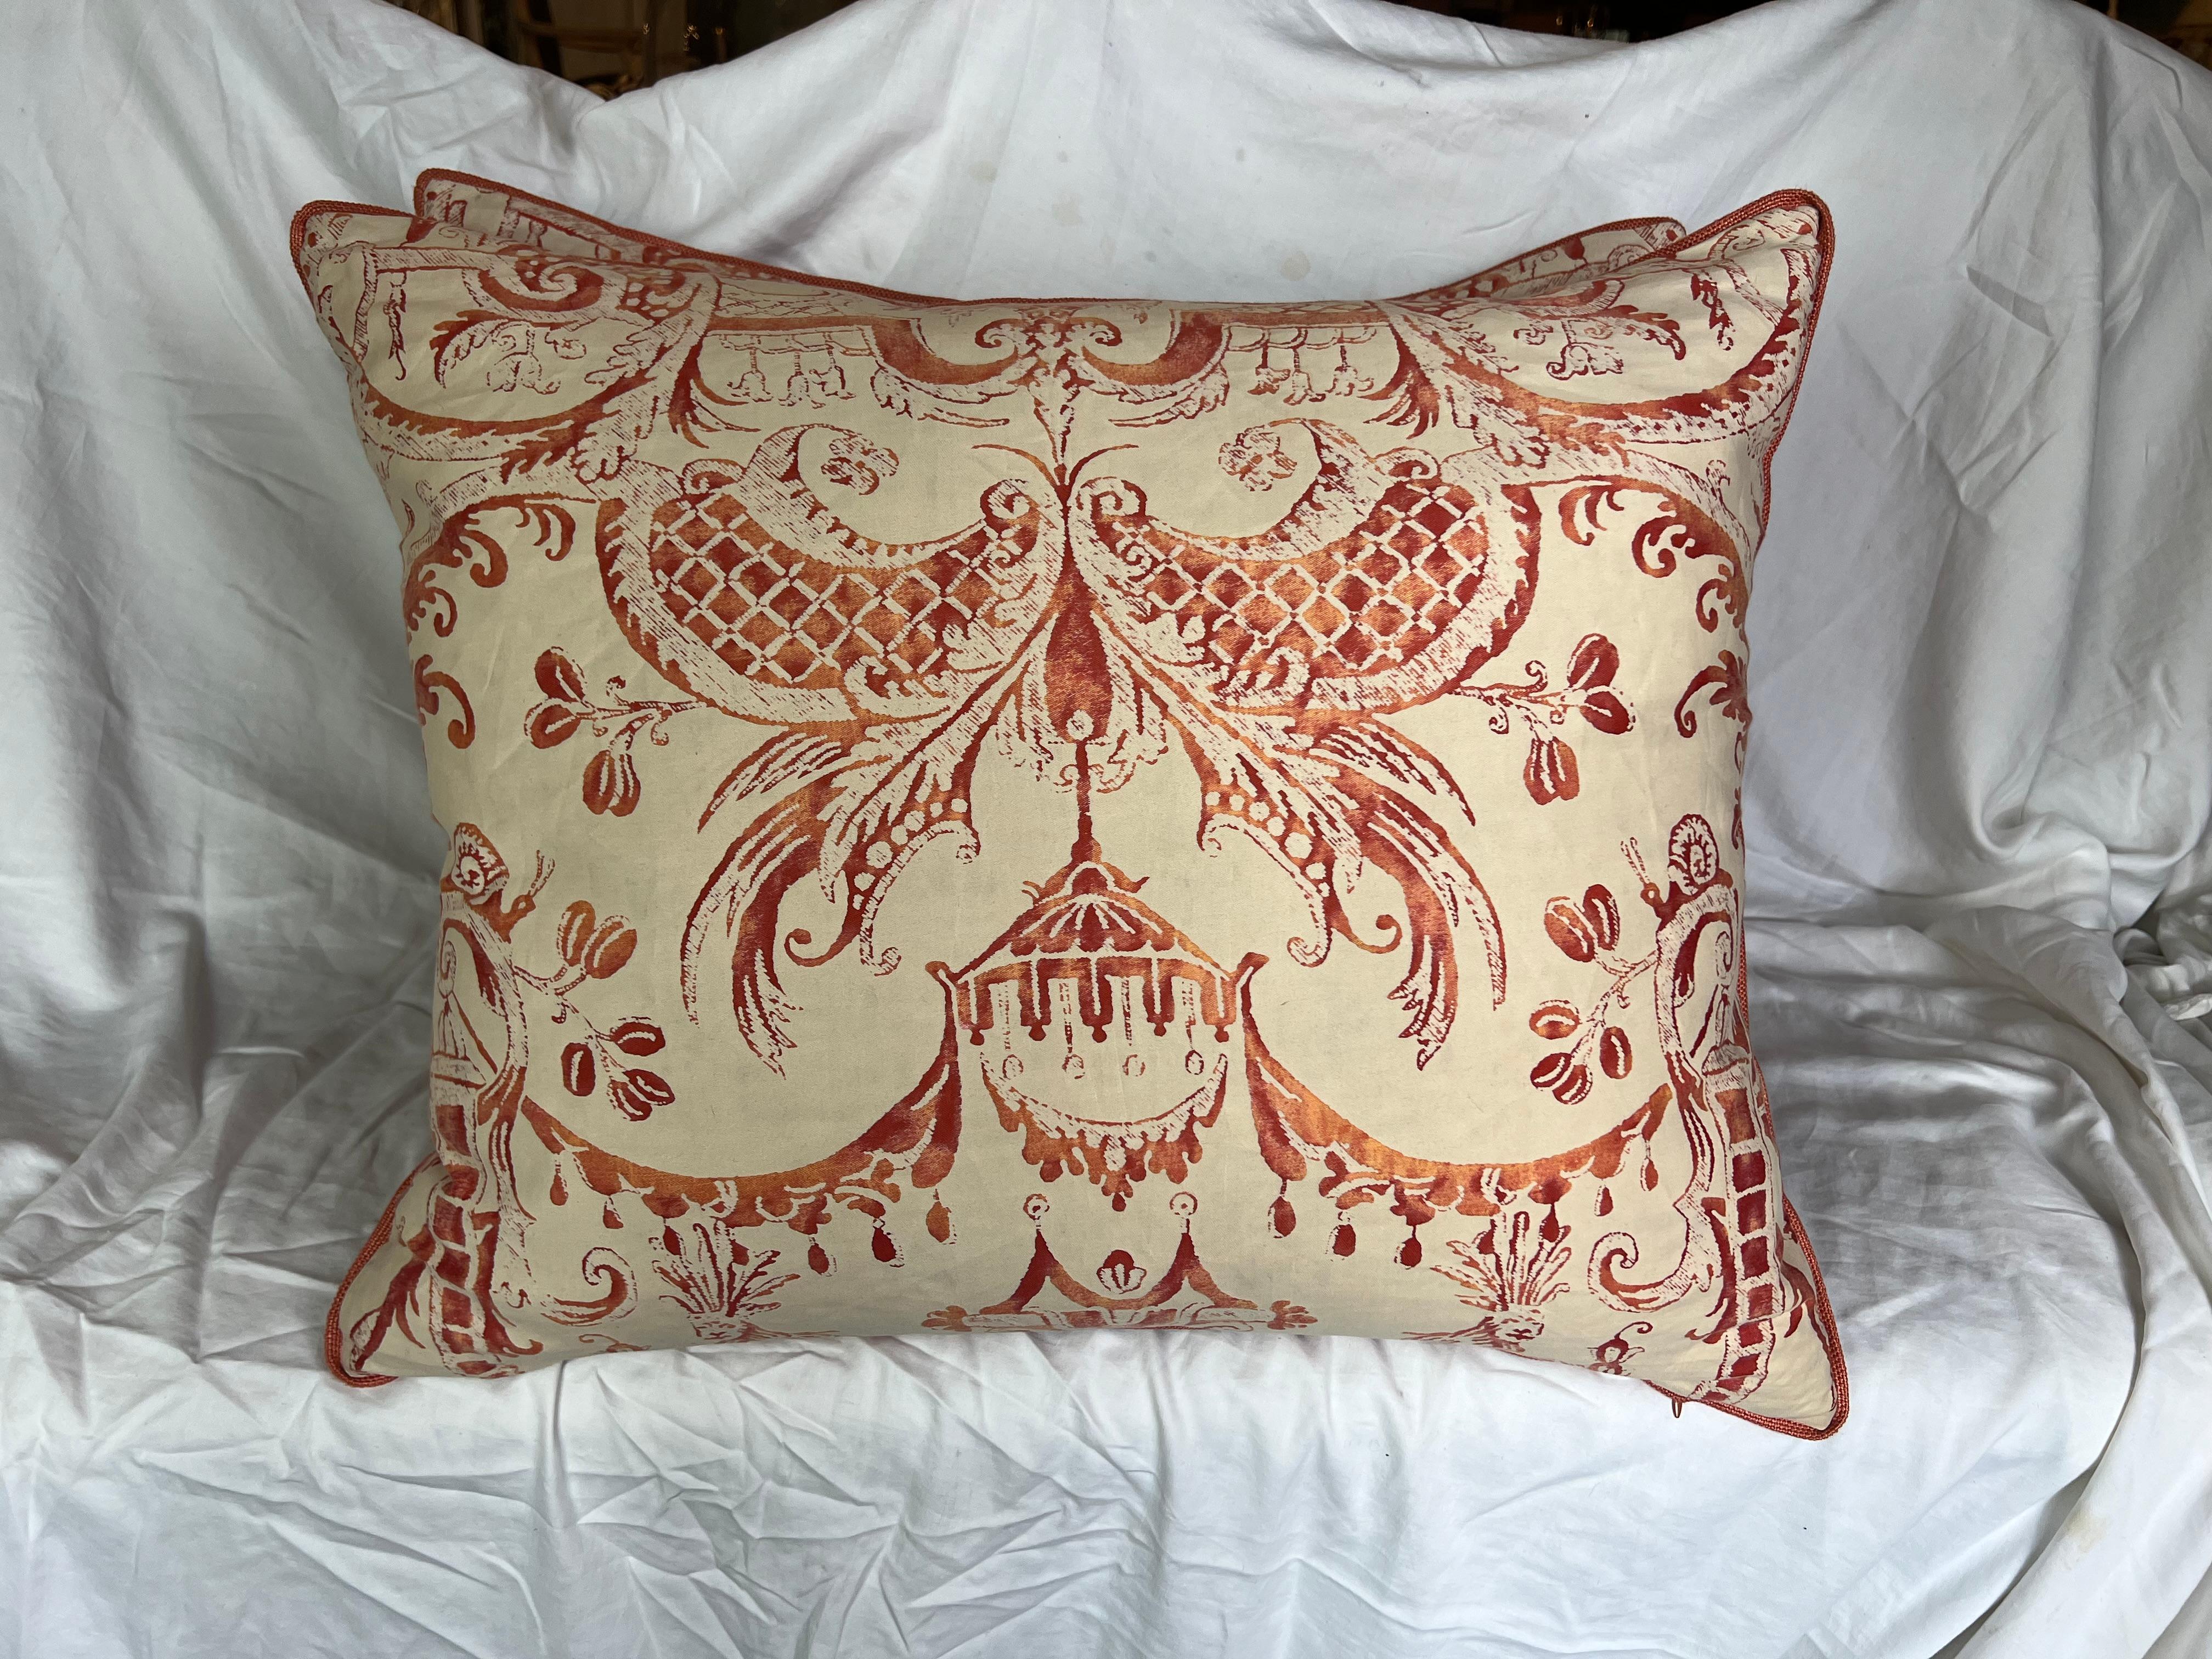 Pair of custom pillows with Fortuny's Mezzianno patterned bittersweet on ivory on the front and a solid rich rust linen on the backs.  The pattern interpreted from designs of Jean Berain, depicting addorsed and confronting monkeys and lions set